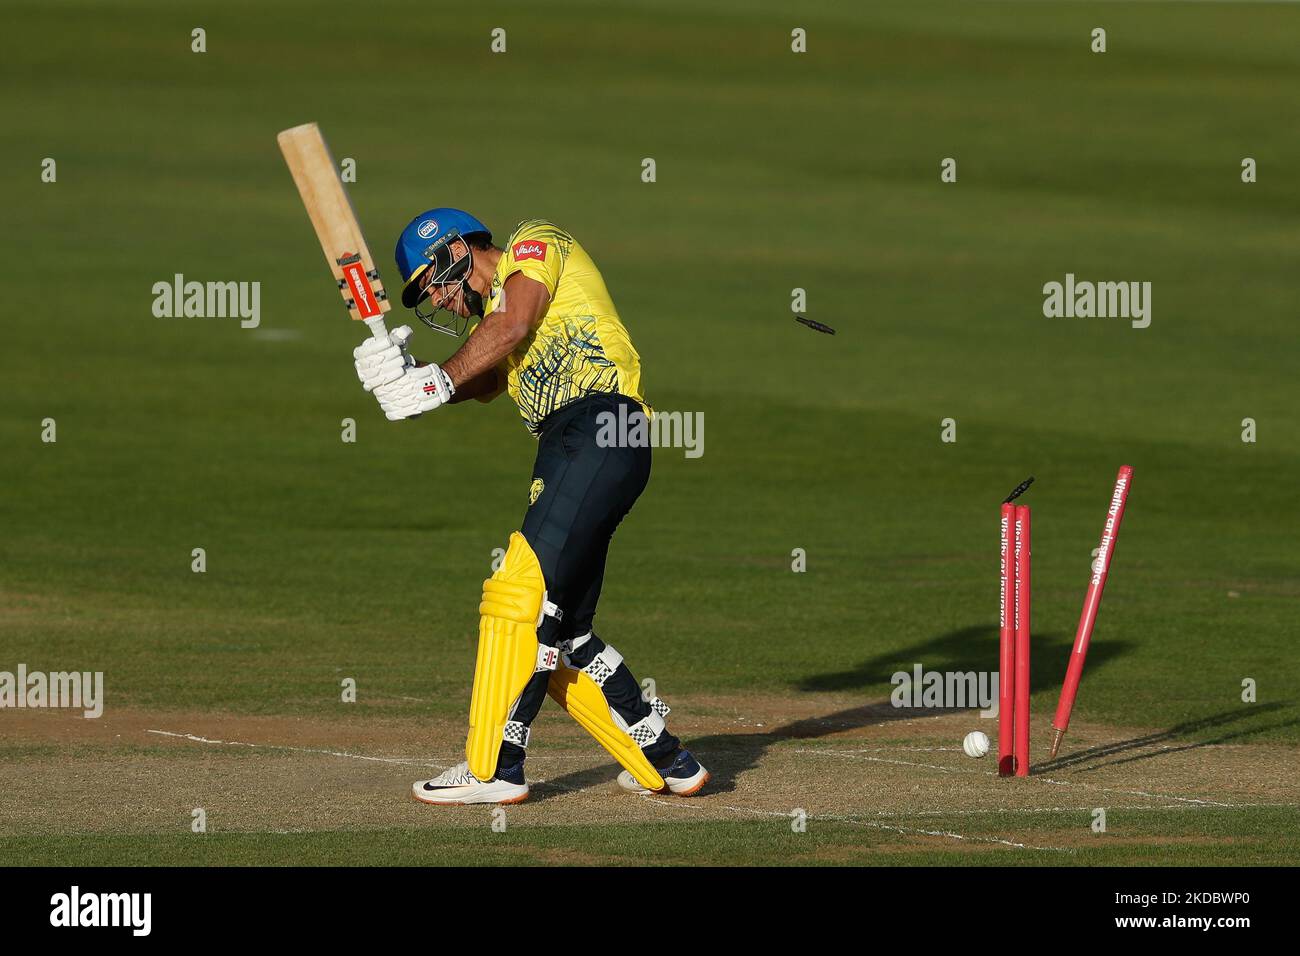 David Bedingham of Durham is bowled during the Vitality Blast T20 match between Durham County Cricket Club and Lancashire at the Seat Unique Riverside, Chester le Street on Friday 10th June 2022. (Photo by Will Matthews/MI News/NurPhoto) Stock Photo